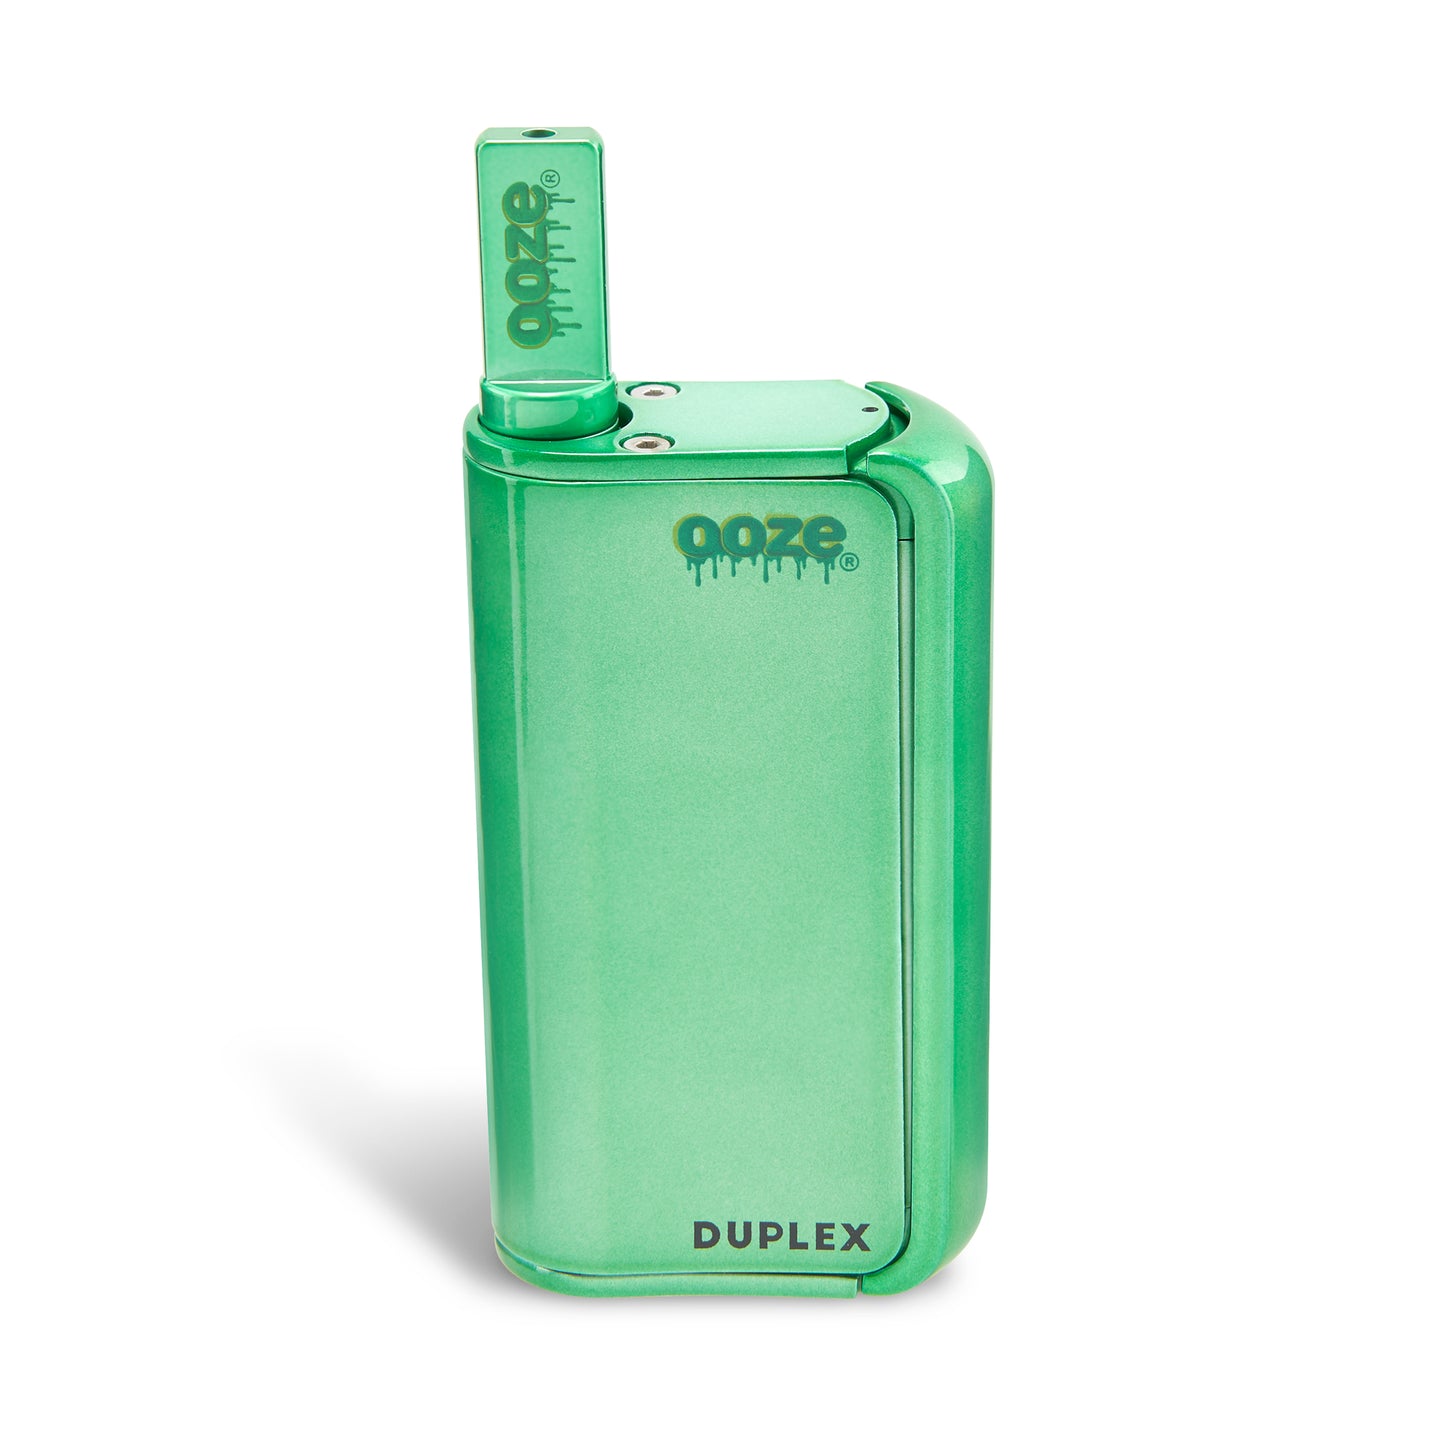 The Mary Jade Ooze Duplex Pro Vaporizer is shown facing forward.